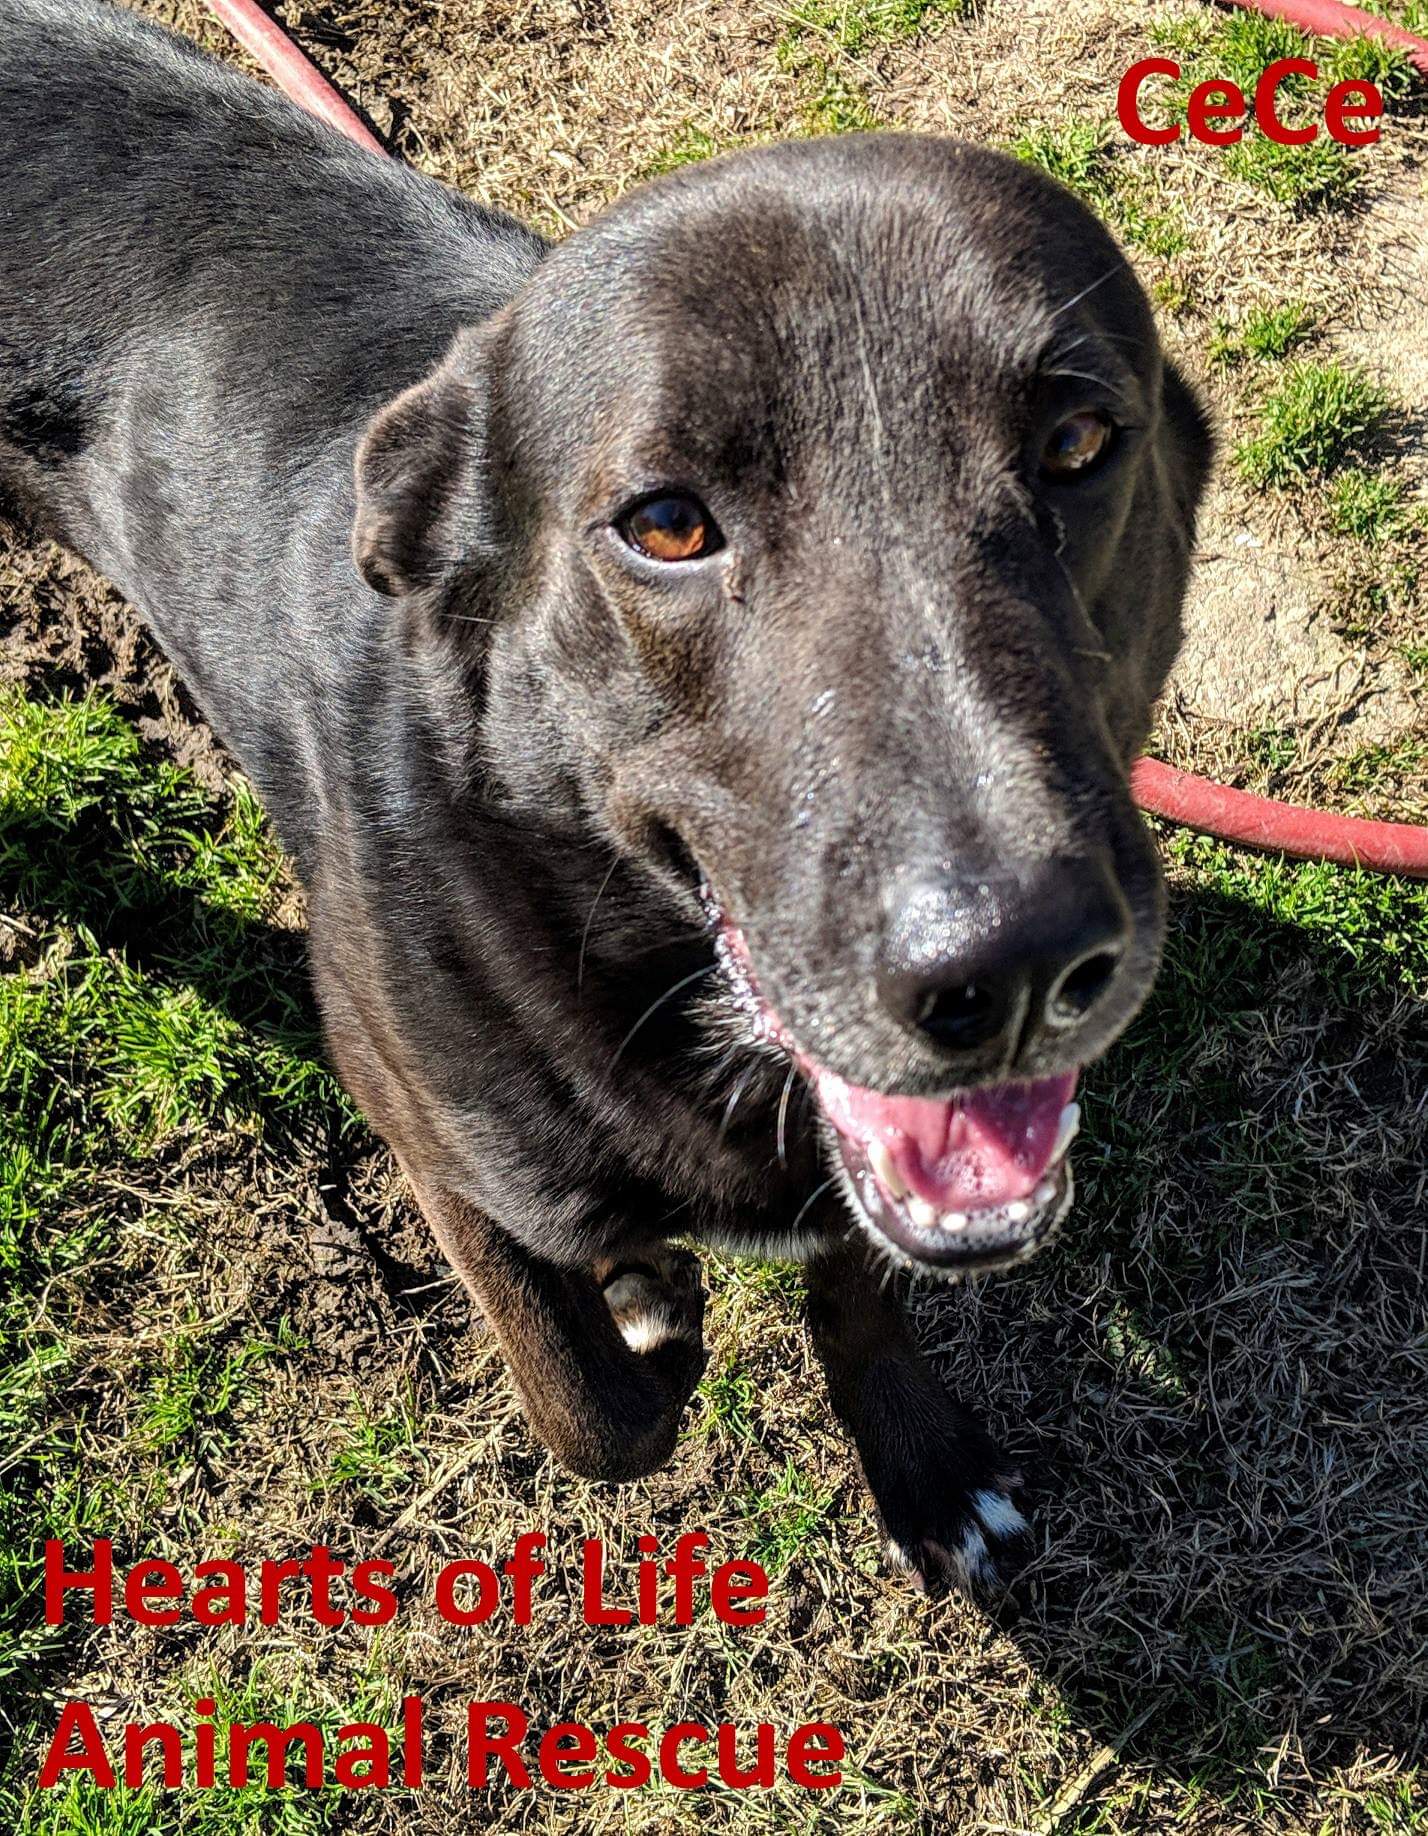 Hearts of Life Animal Rescue Dog of the Week: Meet CeCe!